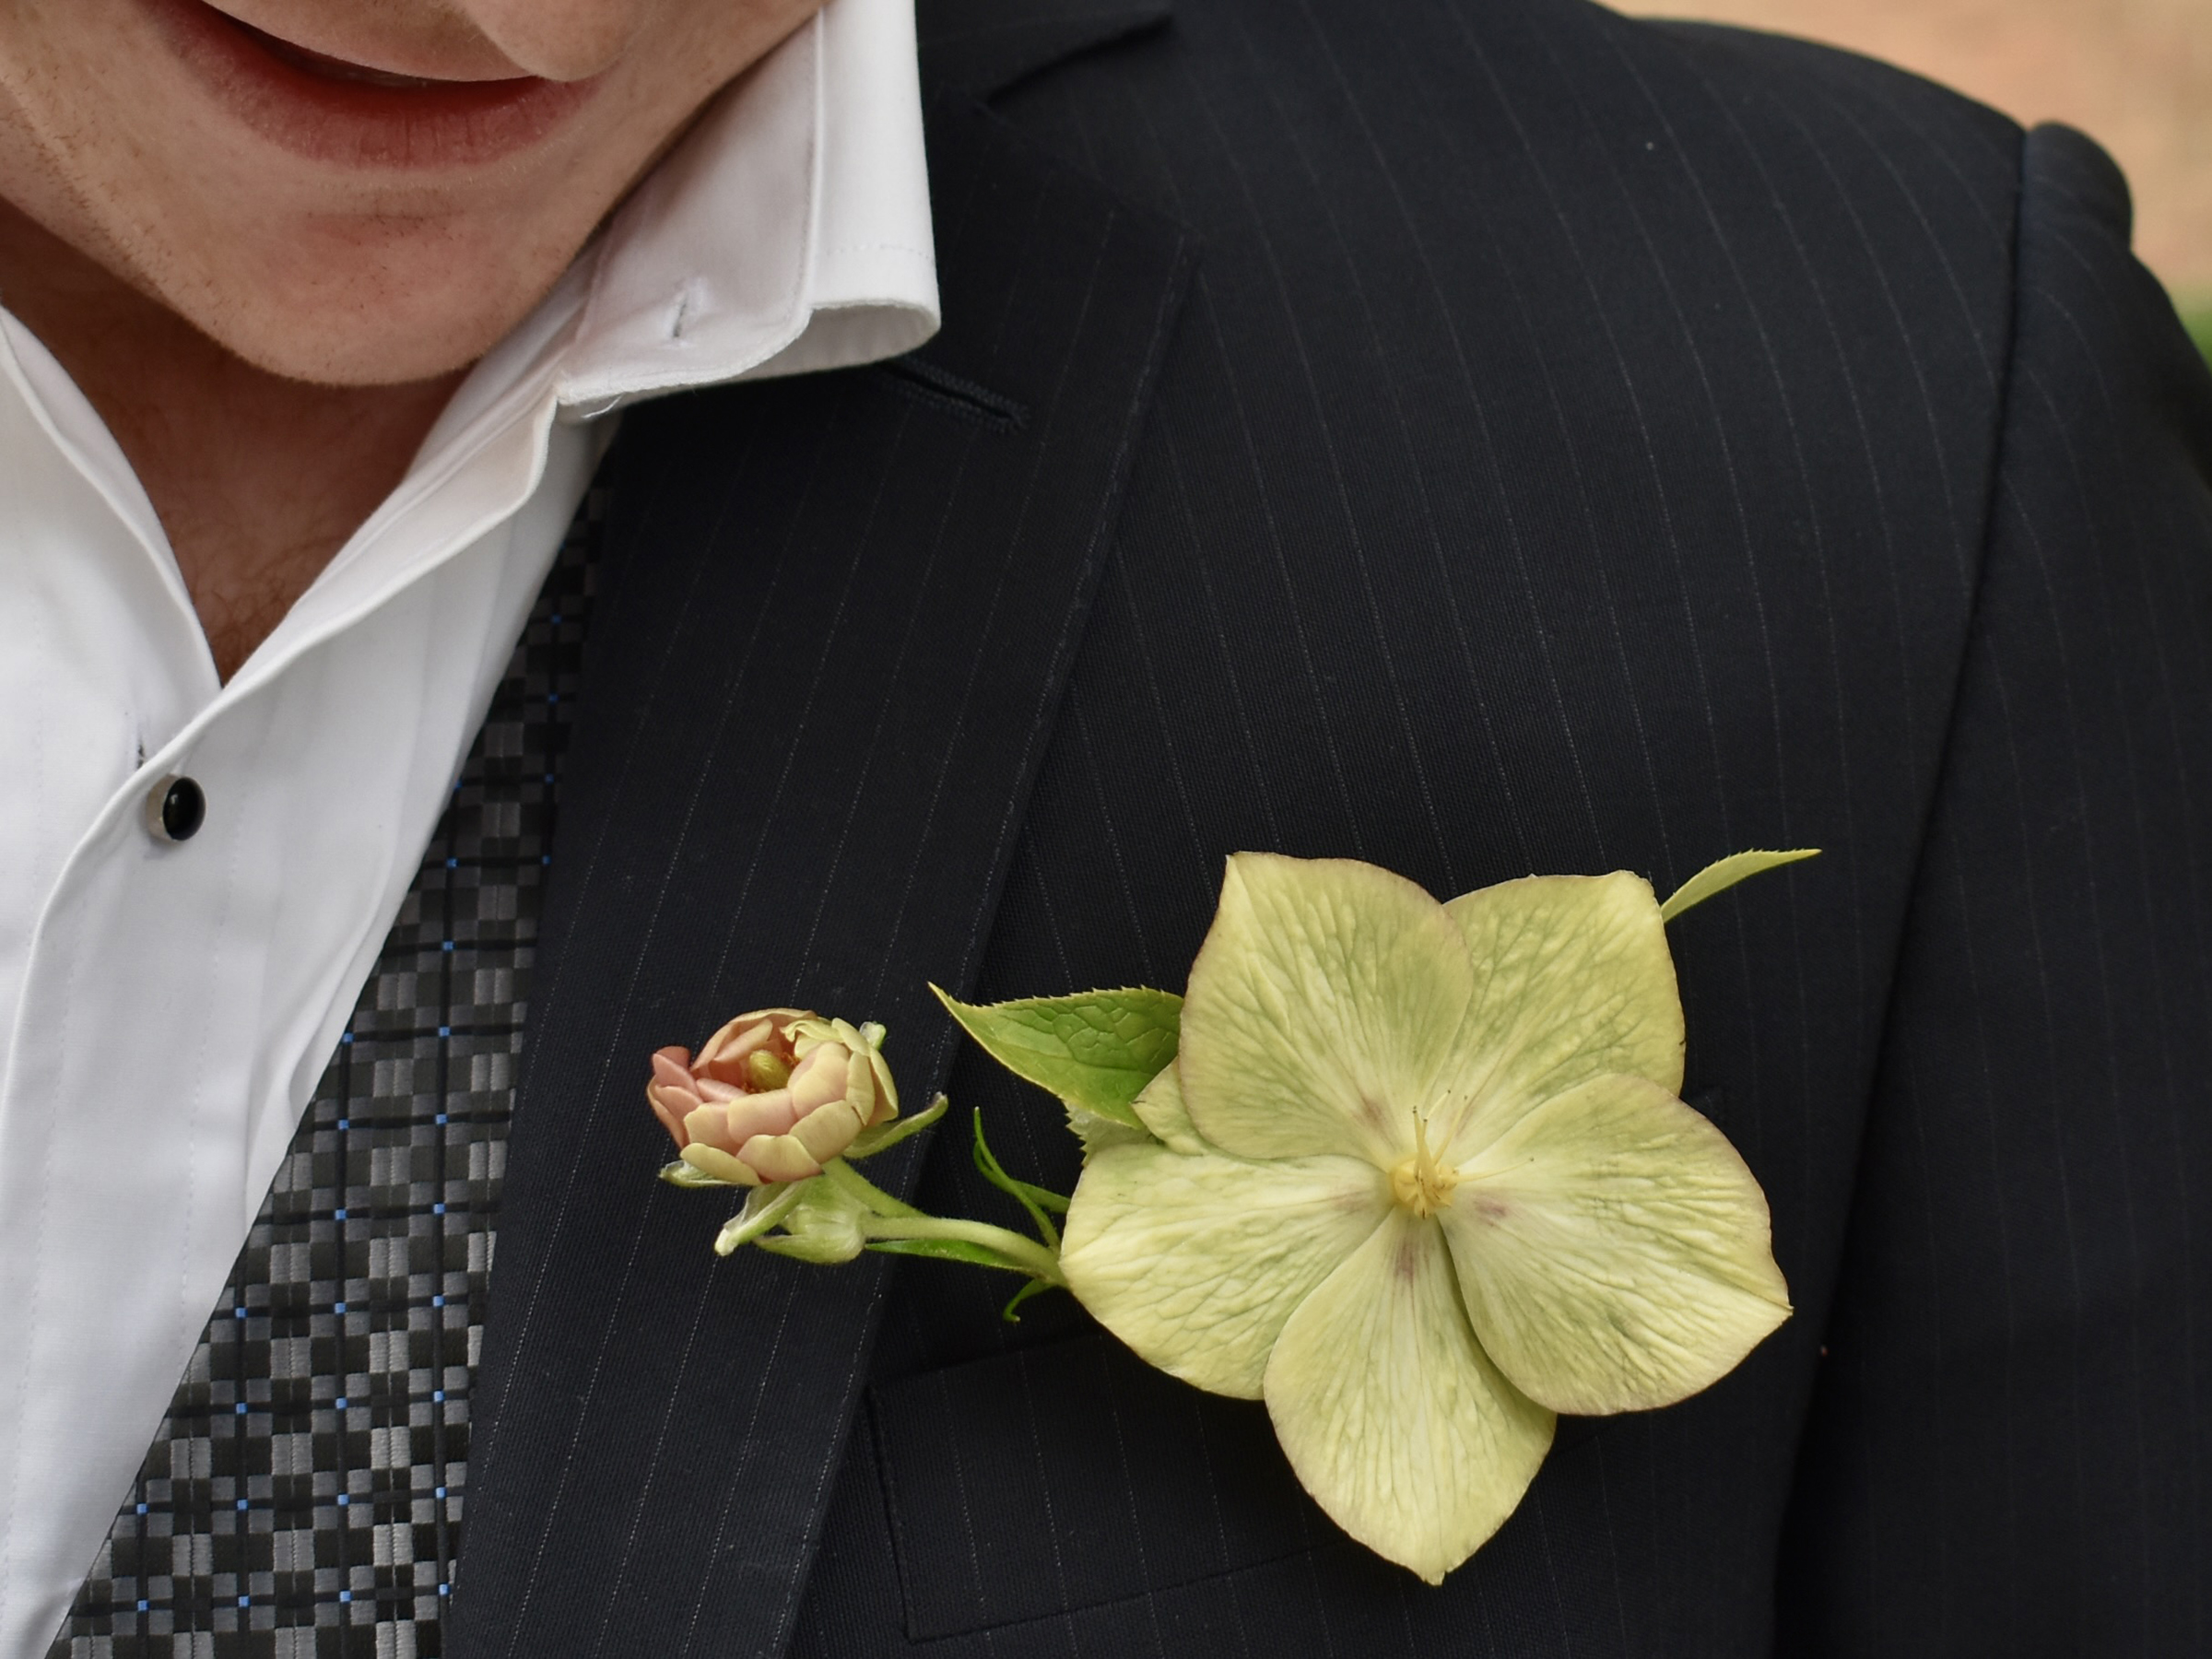 This local boutonniere is a great wedding-related products for the groom.